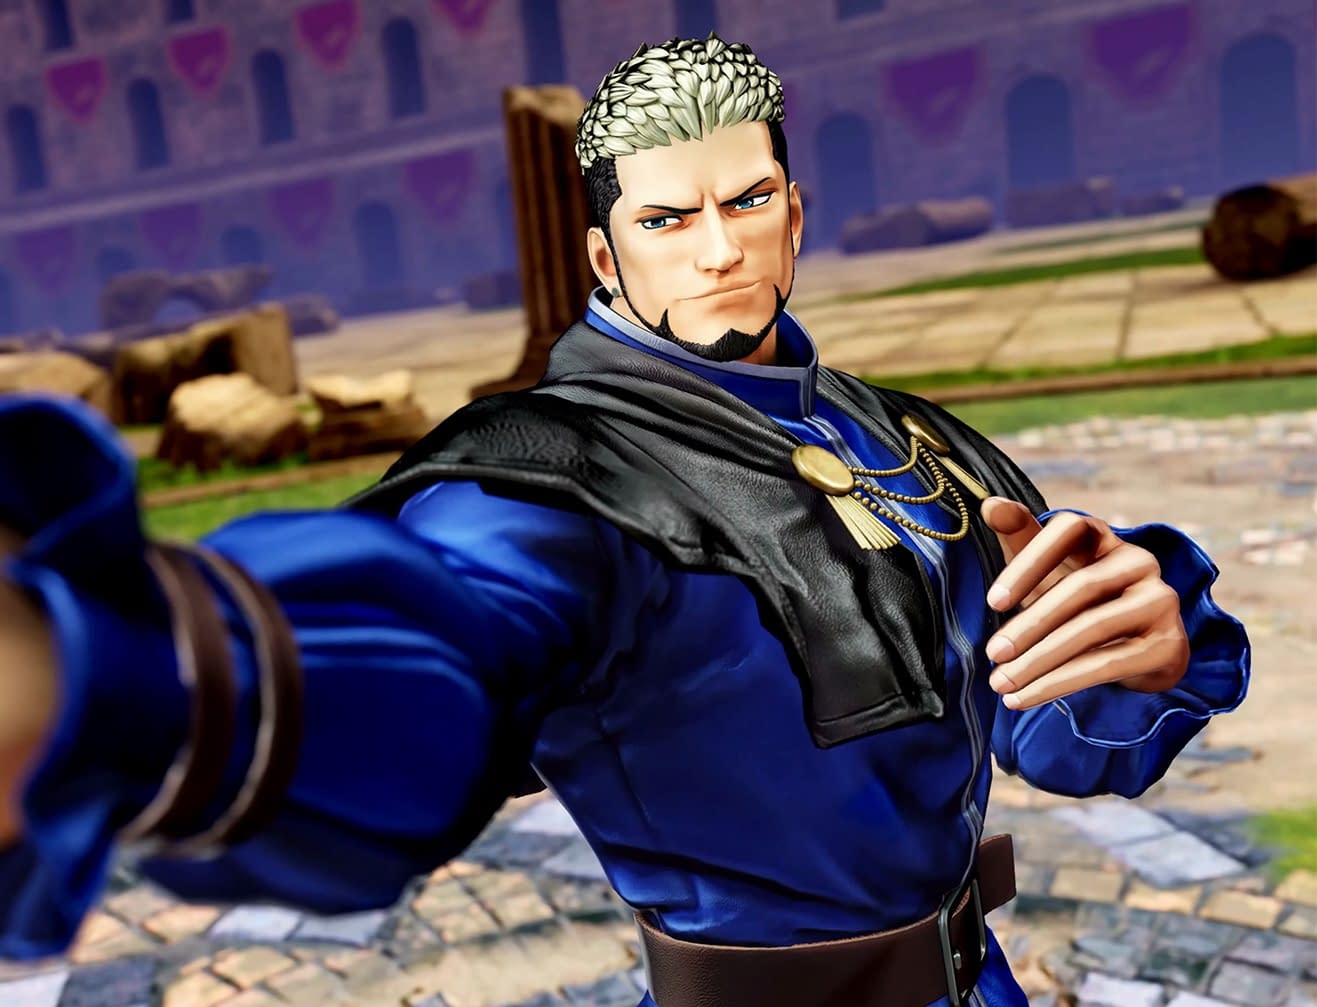 King mixes things up in the latest King of Fighters XV reveal - Dot Esports